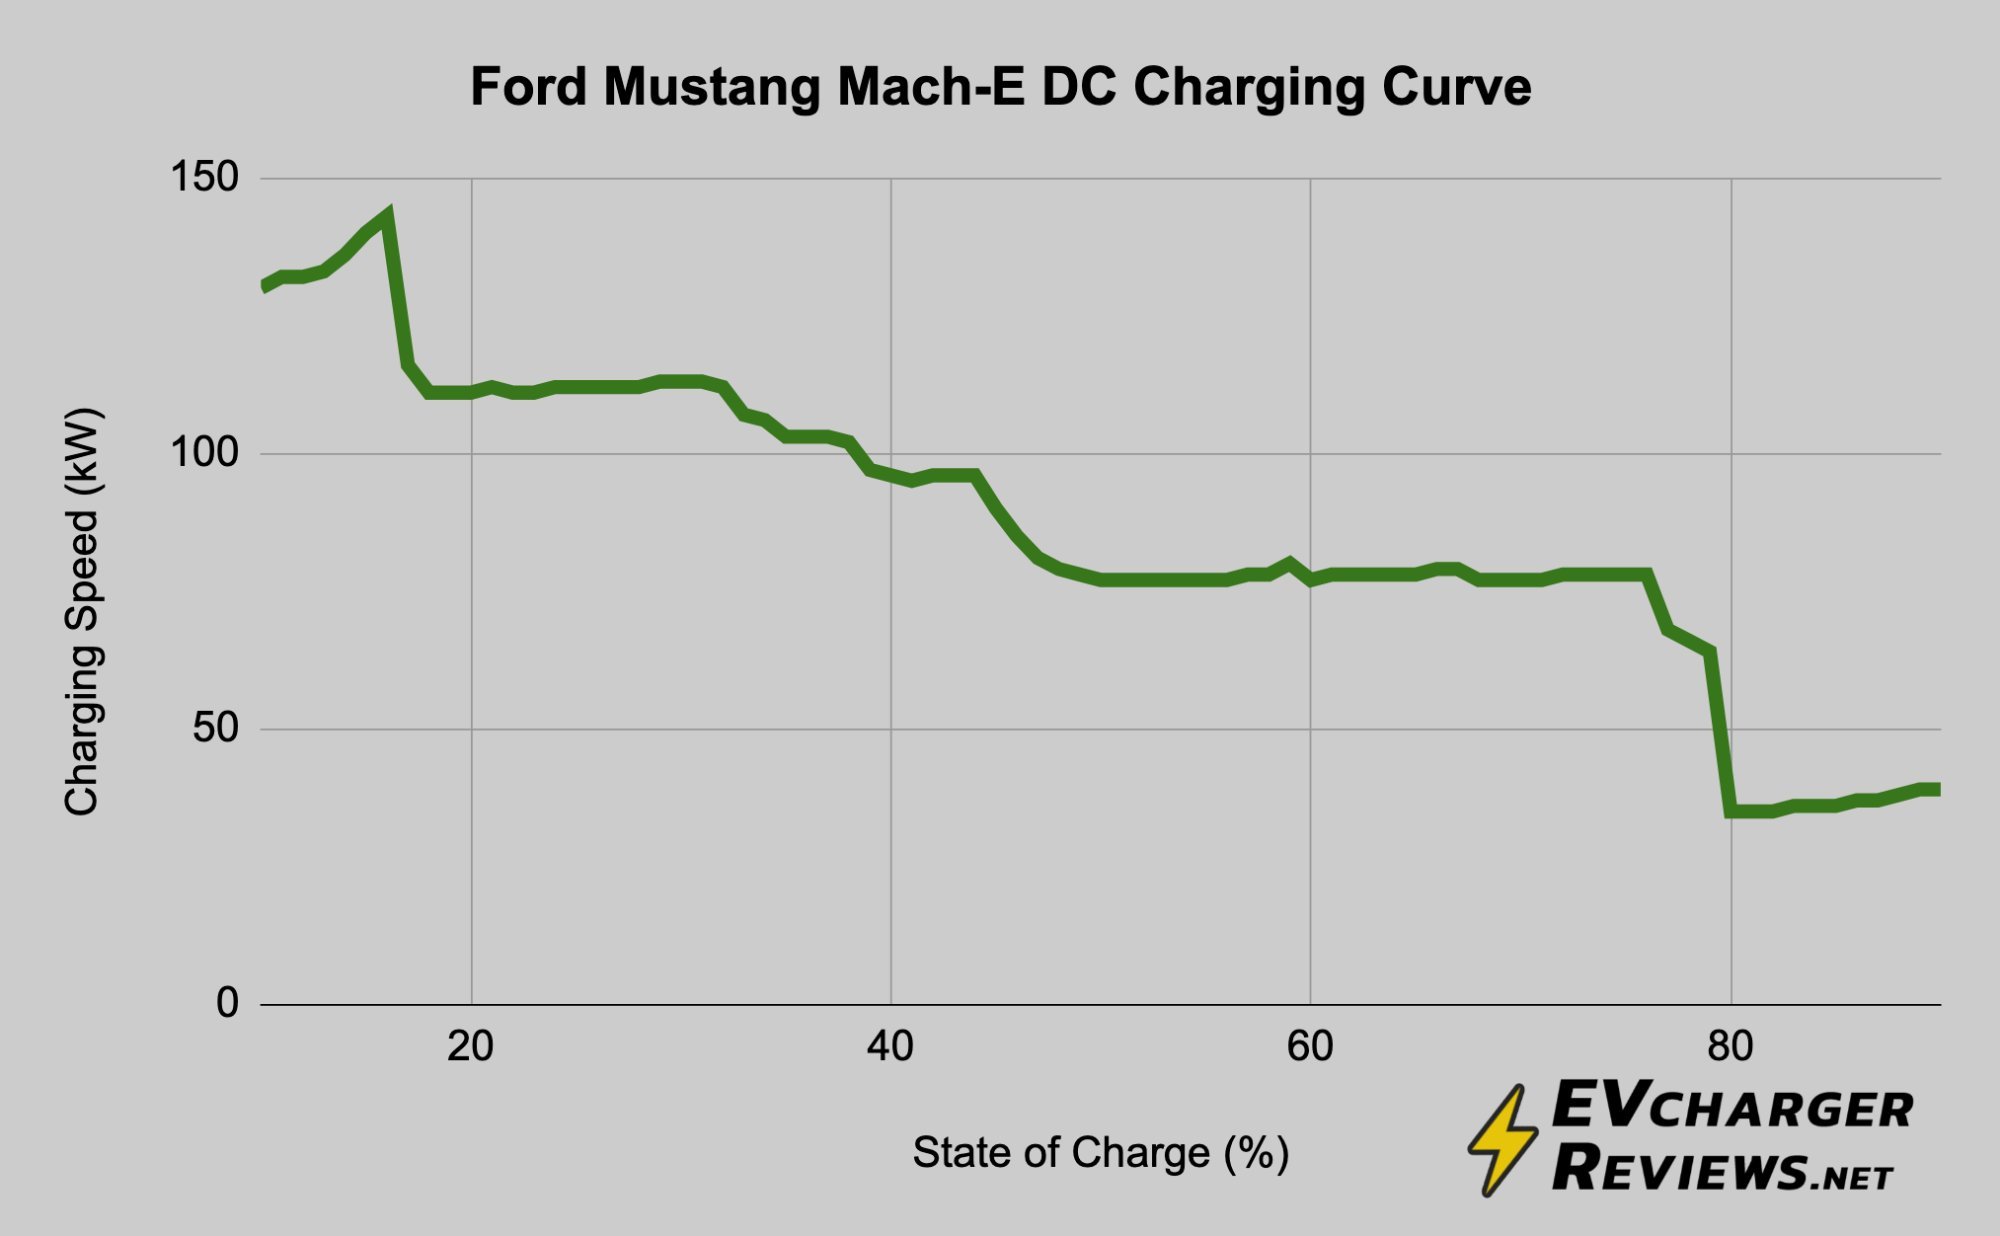 DC Charging curve for Ford Mustang Mach-E